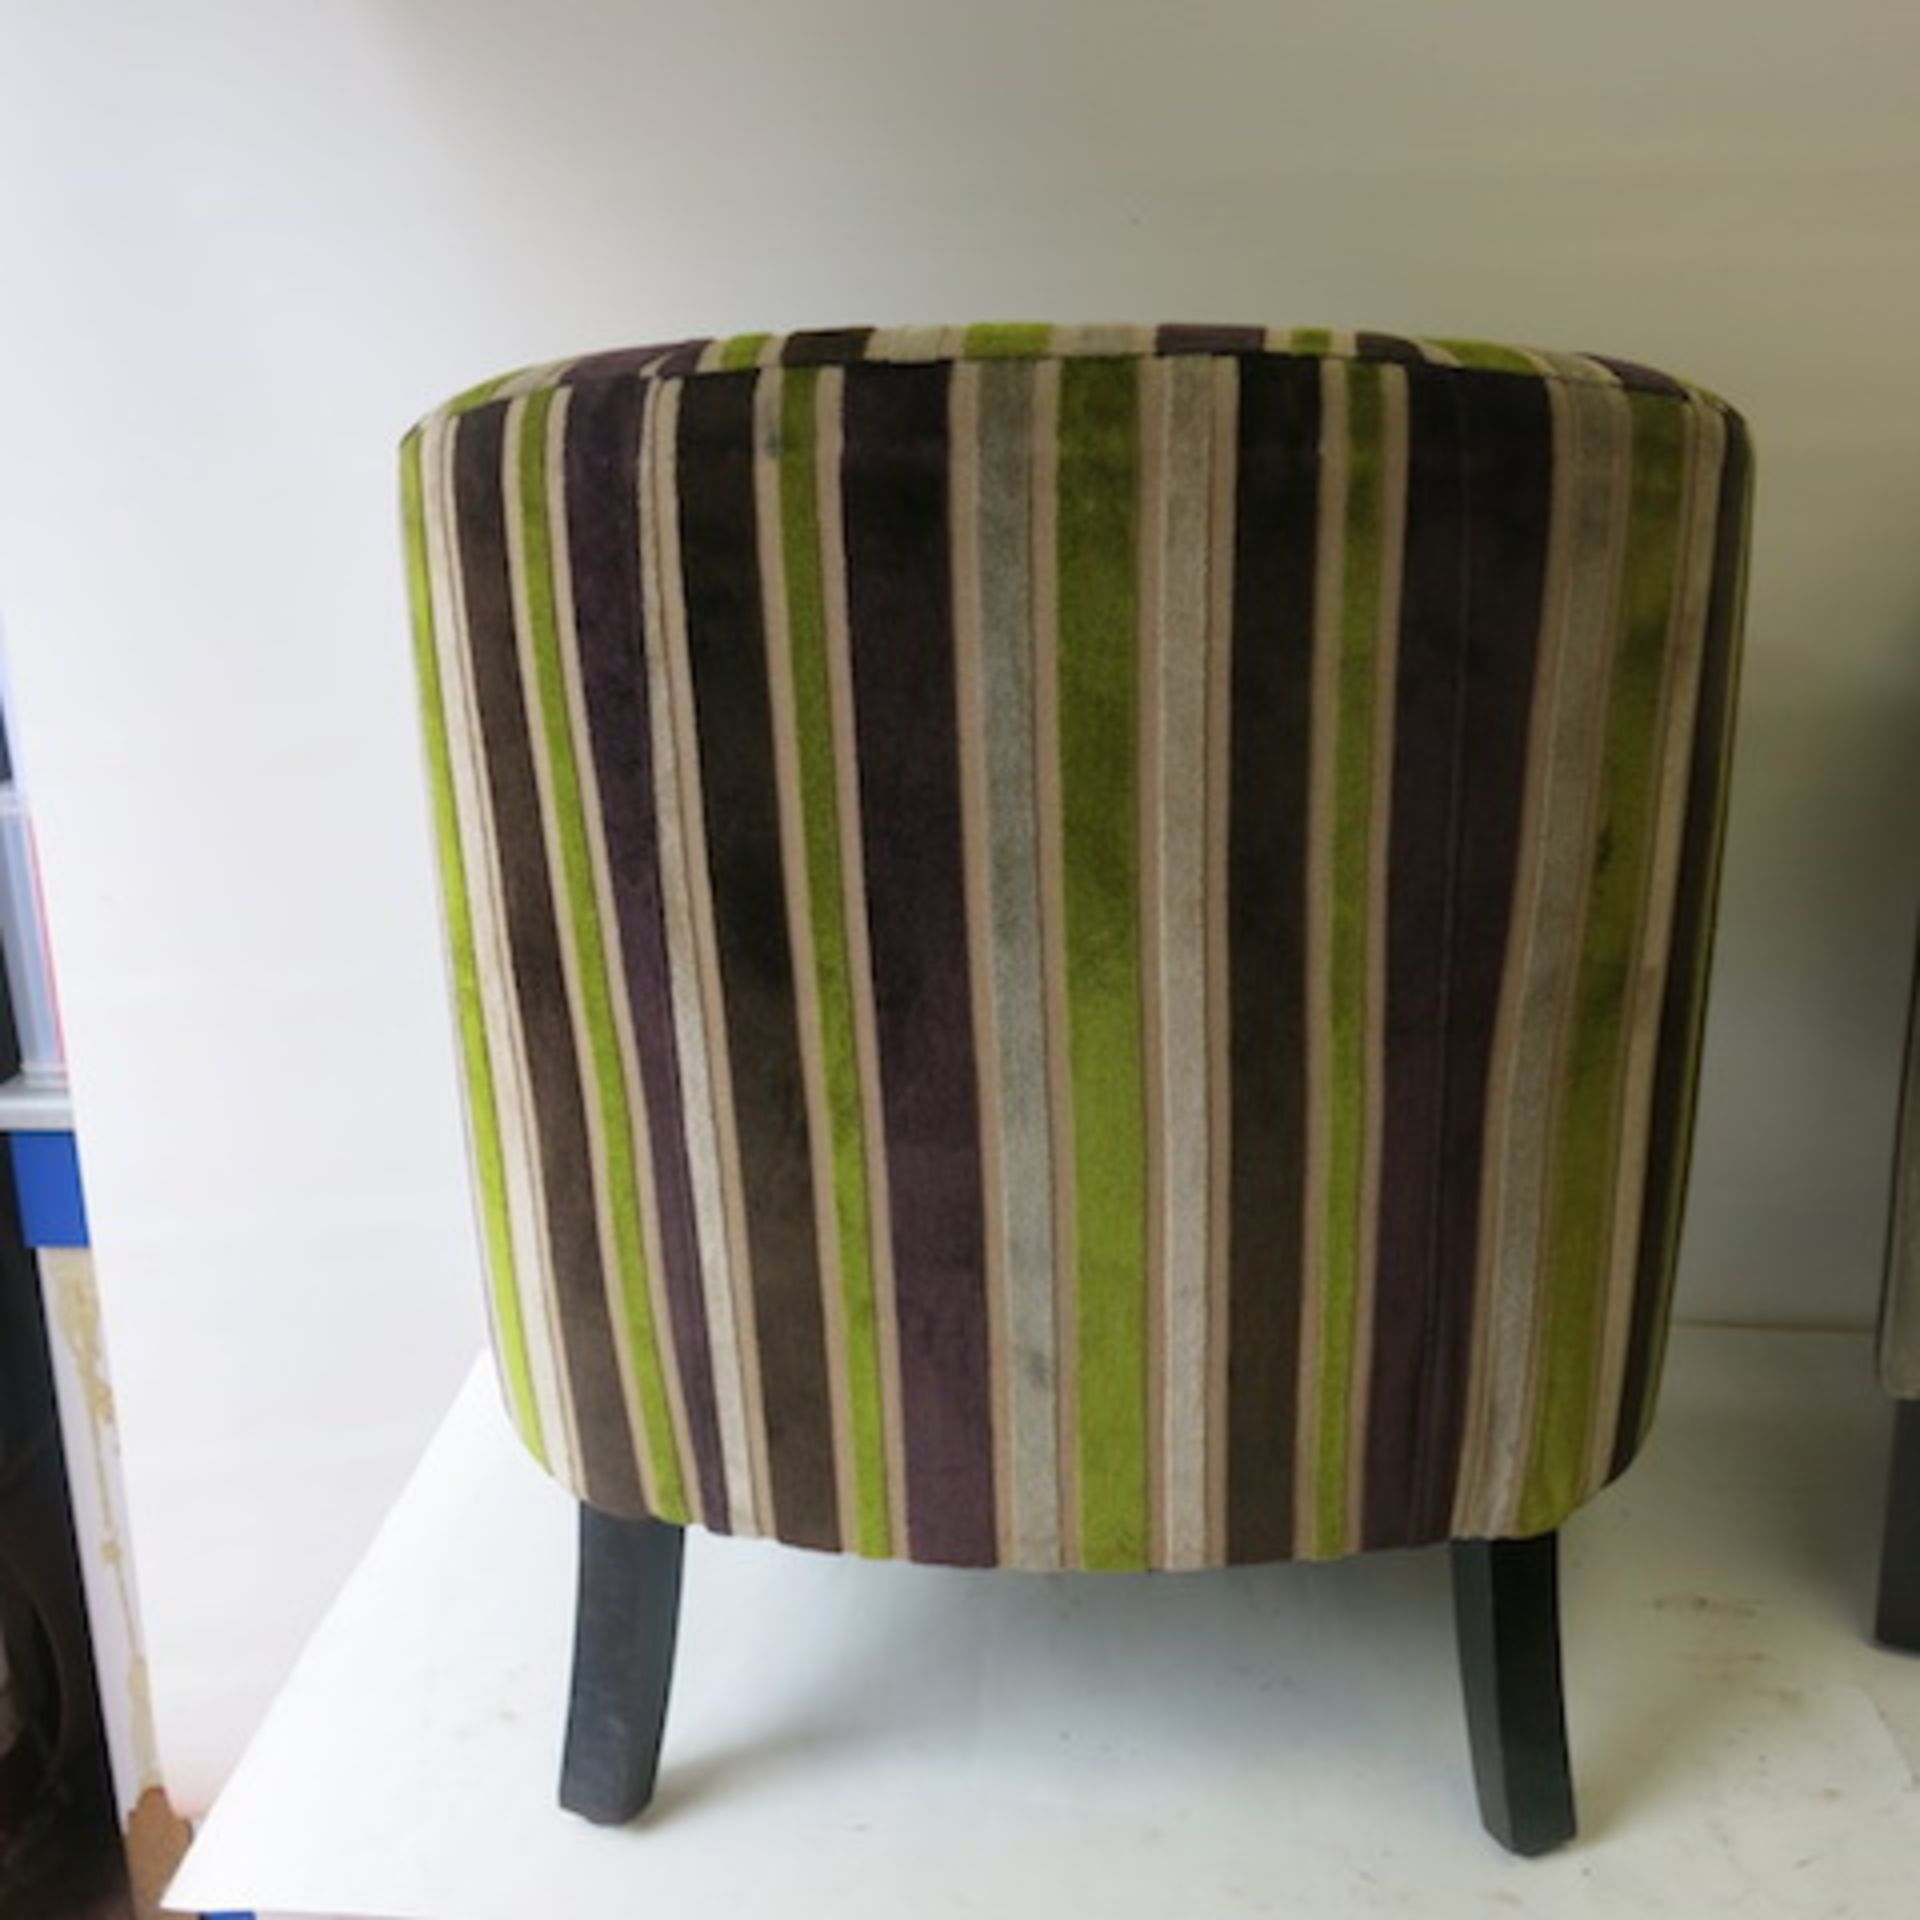 2 x Matching Crushed Velour Tub Chairs with Faux Leather Seat, in Striped Lime/Purple & Beige - Image 6 of 6